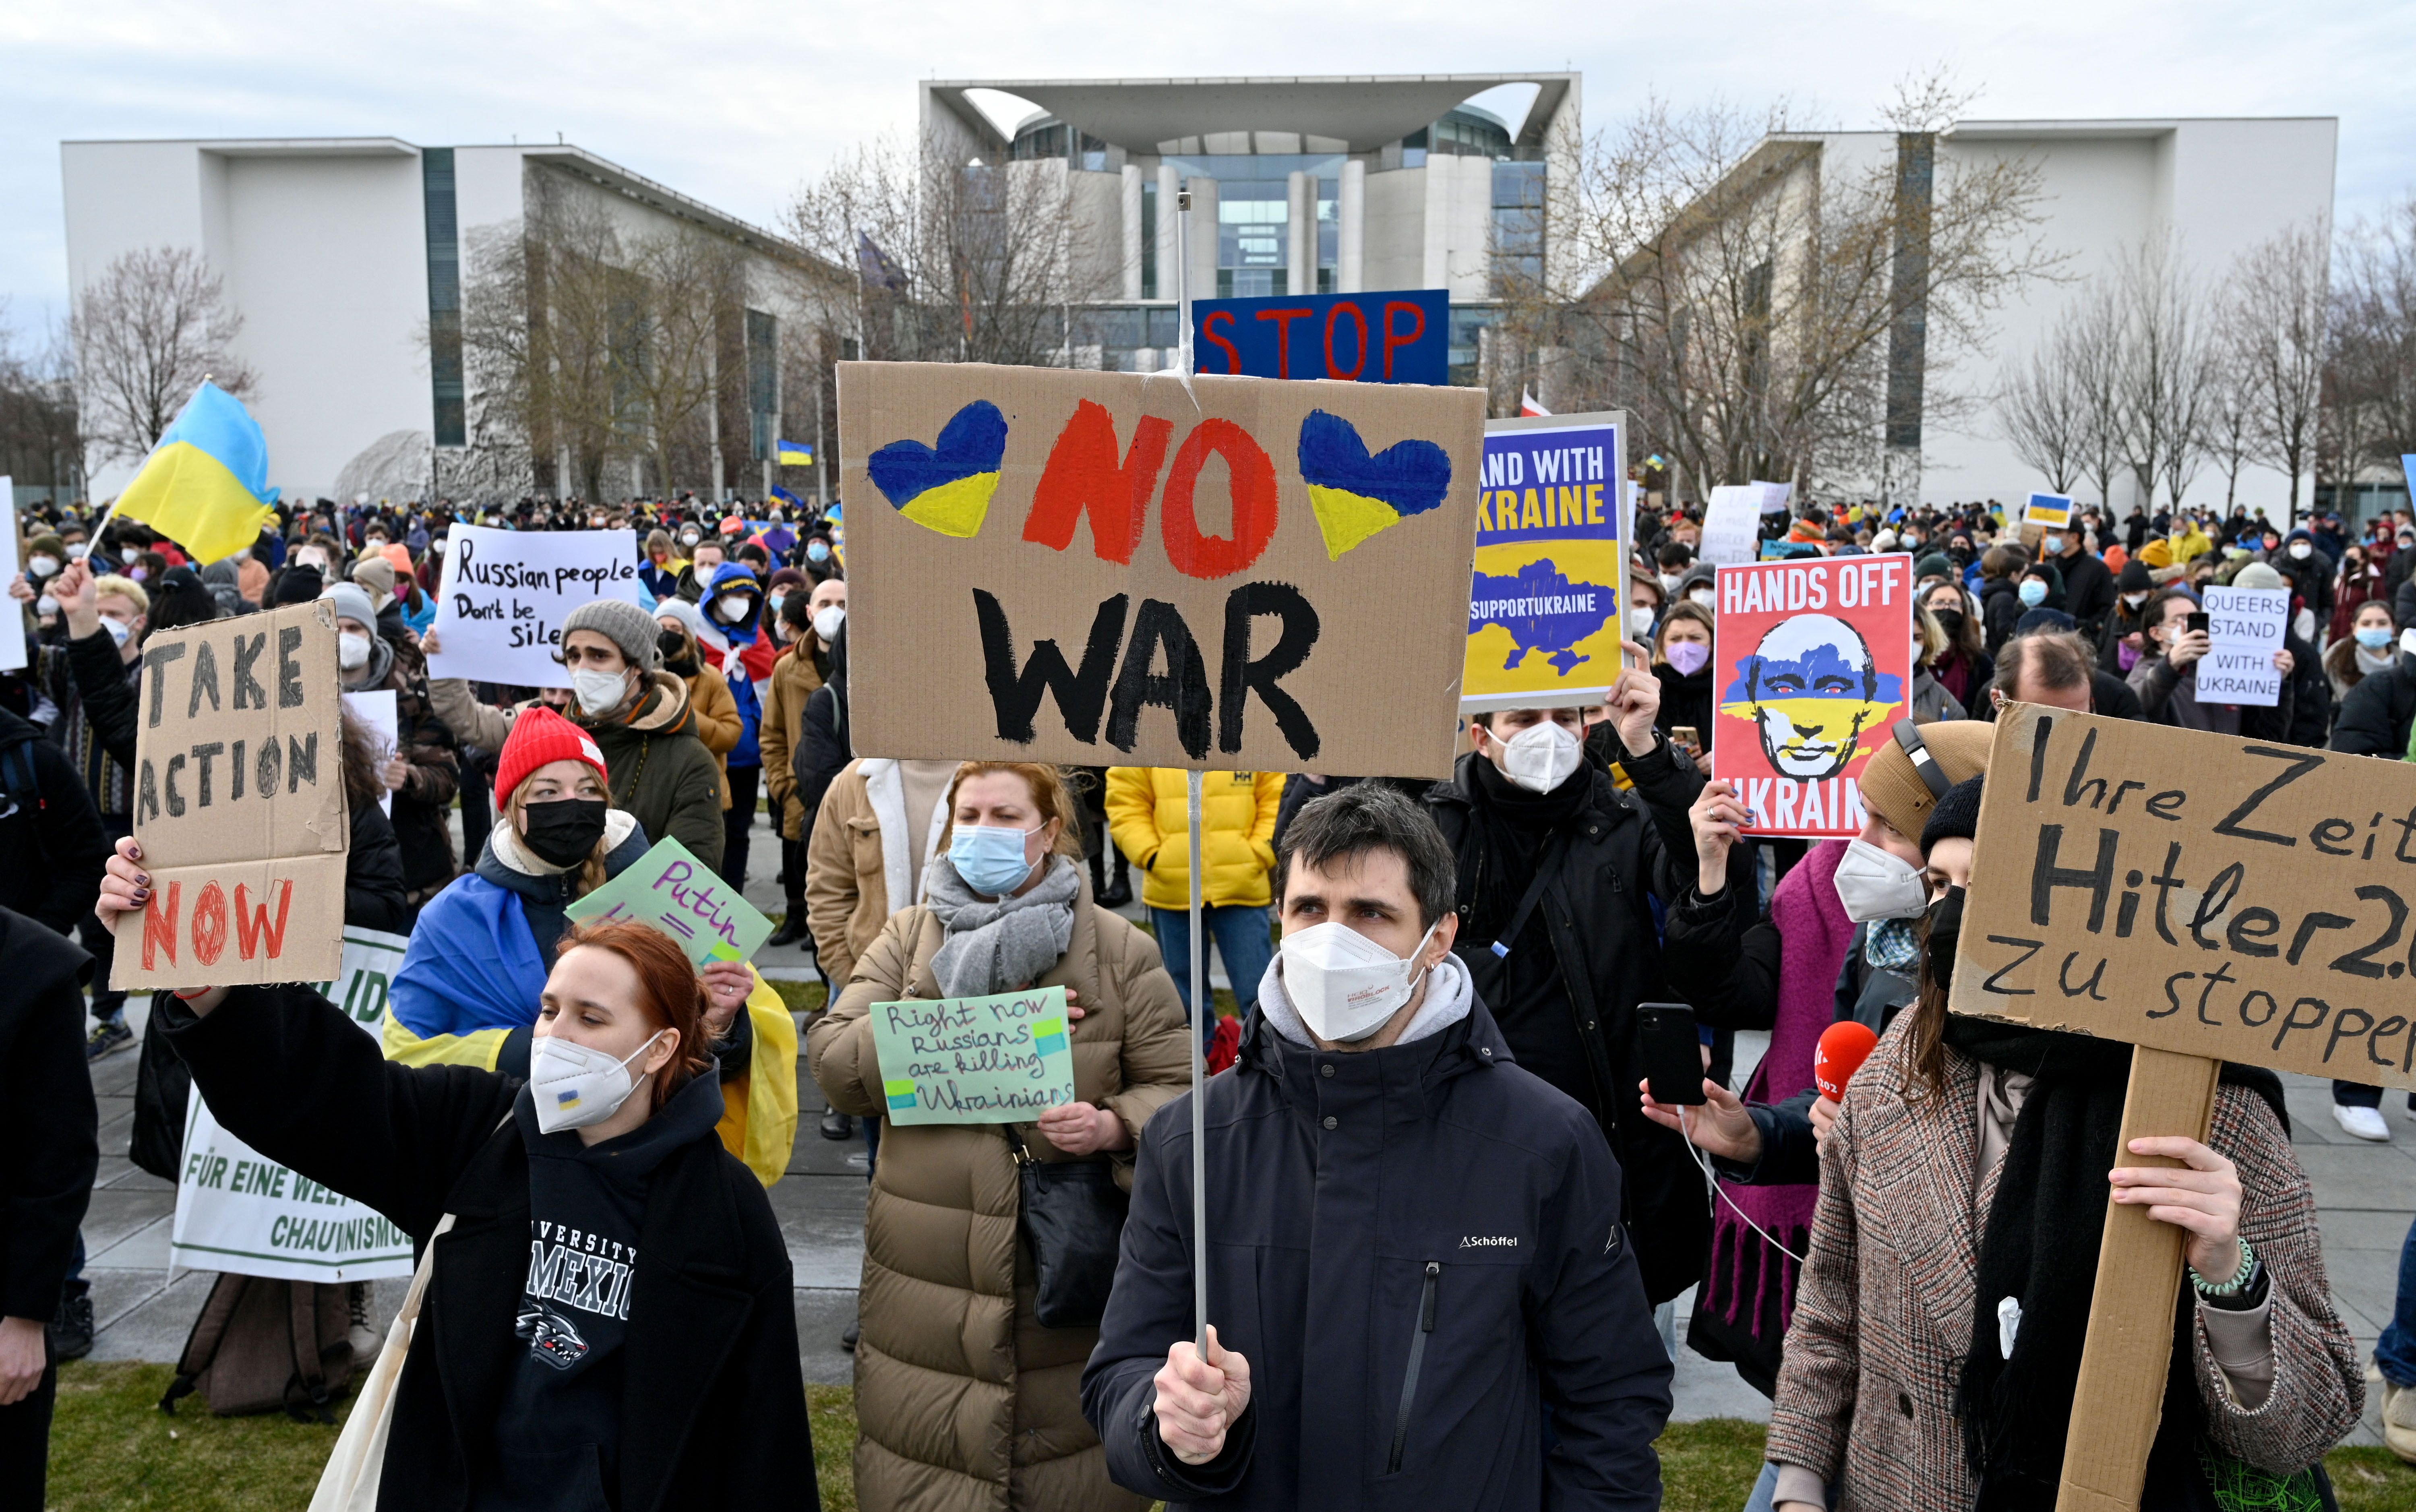 People protest against Russia's invasion of Ukraine on February 24, 2022 in front of the Chancellery in Berlin